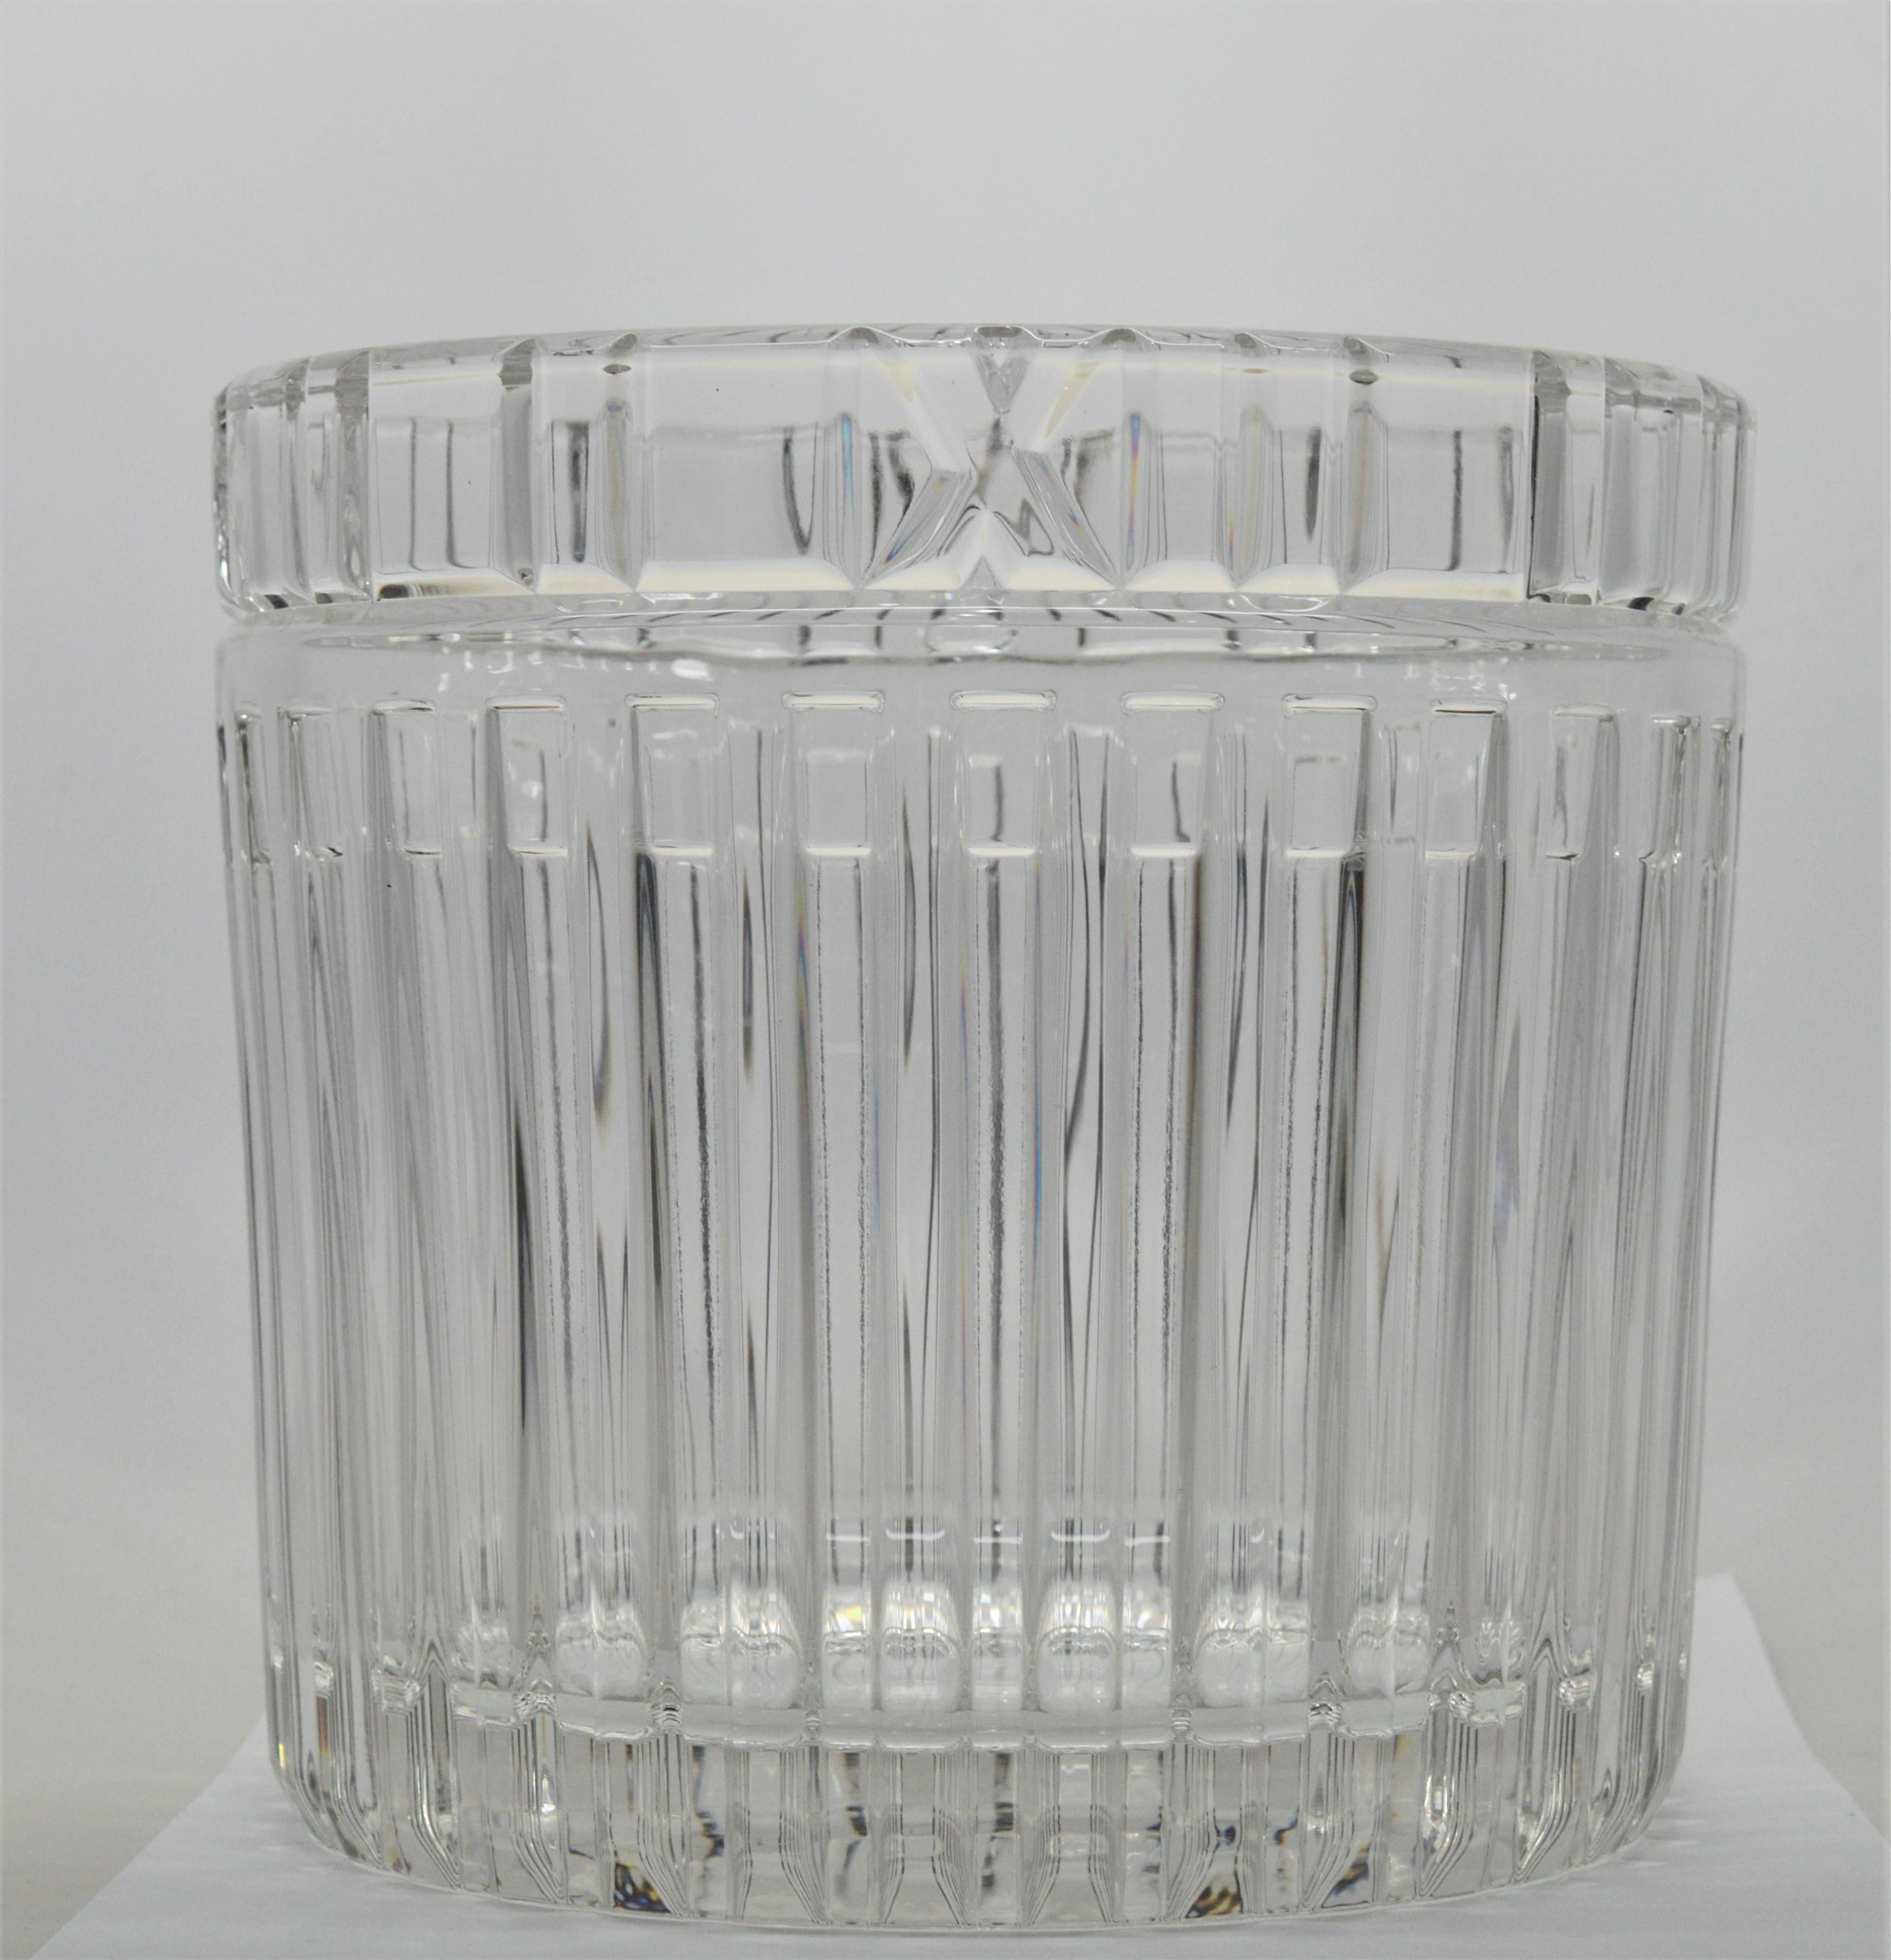 Tiffany & Co. Crystal Champagne Ice Cooler Bucket from the Atlas Collection featuring an Art Deco Roman numeral motif and named after the famed Atlas Clock that has crowned the entrance to the Tiffany flagship store since the 1850's. This stunning